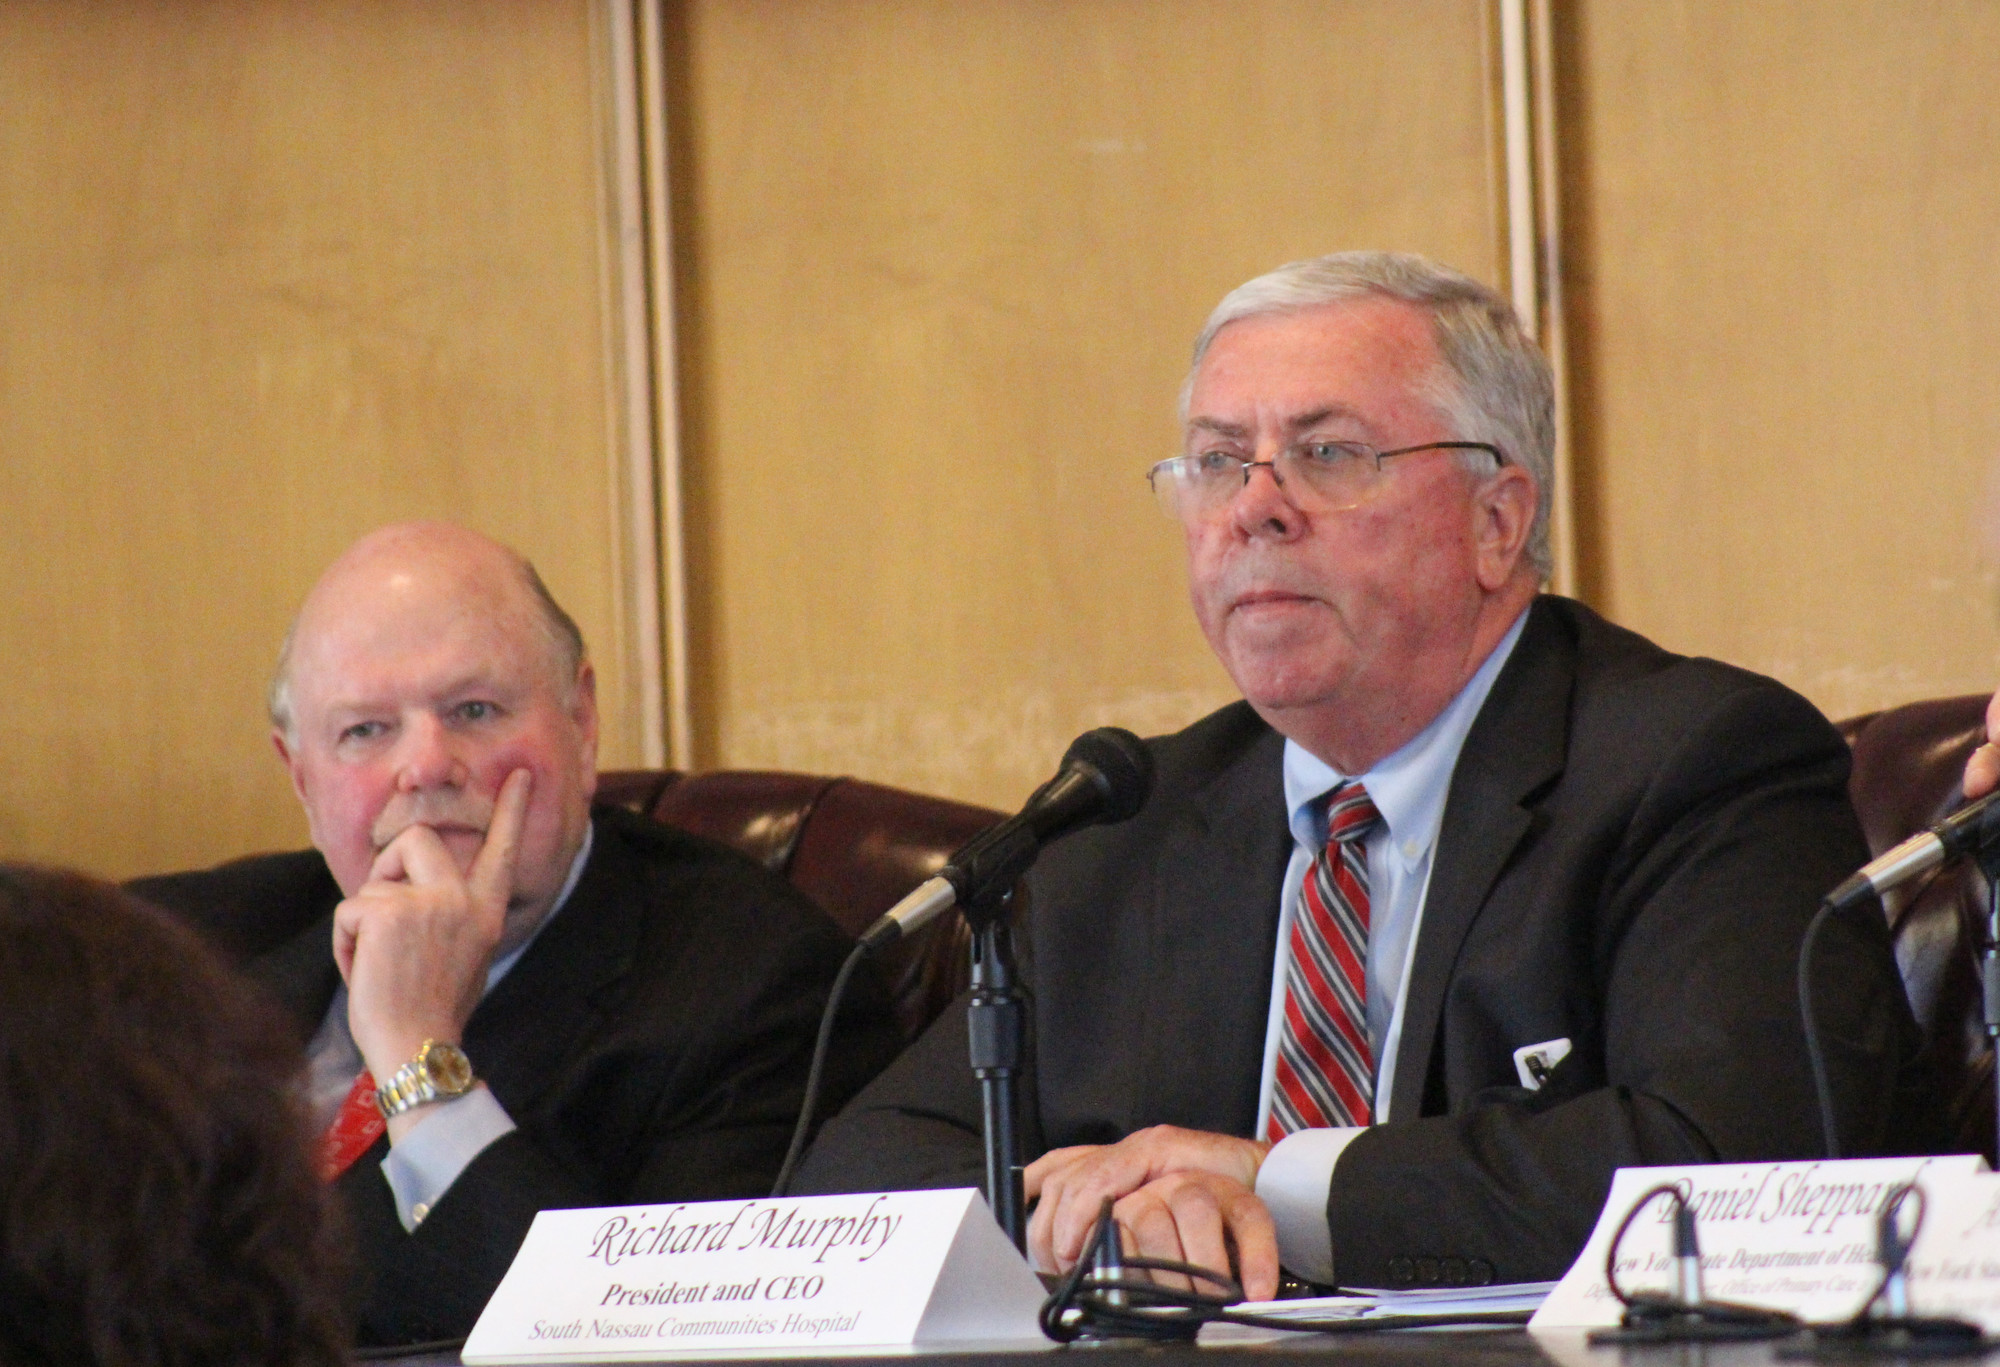 Joseph Fennessy, left, chairman of South Nassau's Board of Directors, and SNCH's President and CEO Richard Murphy listened to nearly 50 residents make their case for a full-service hospital in Long Beach.